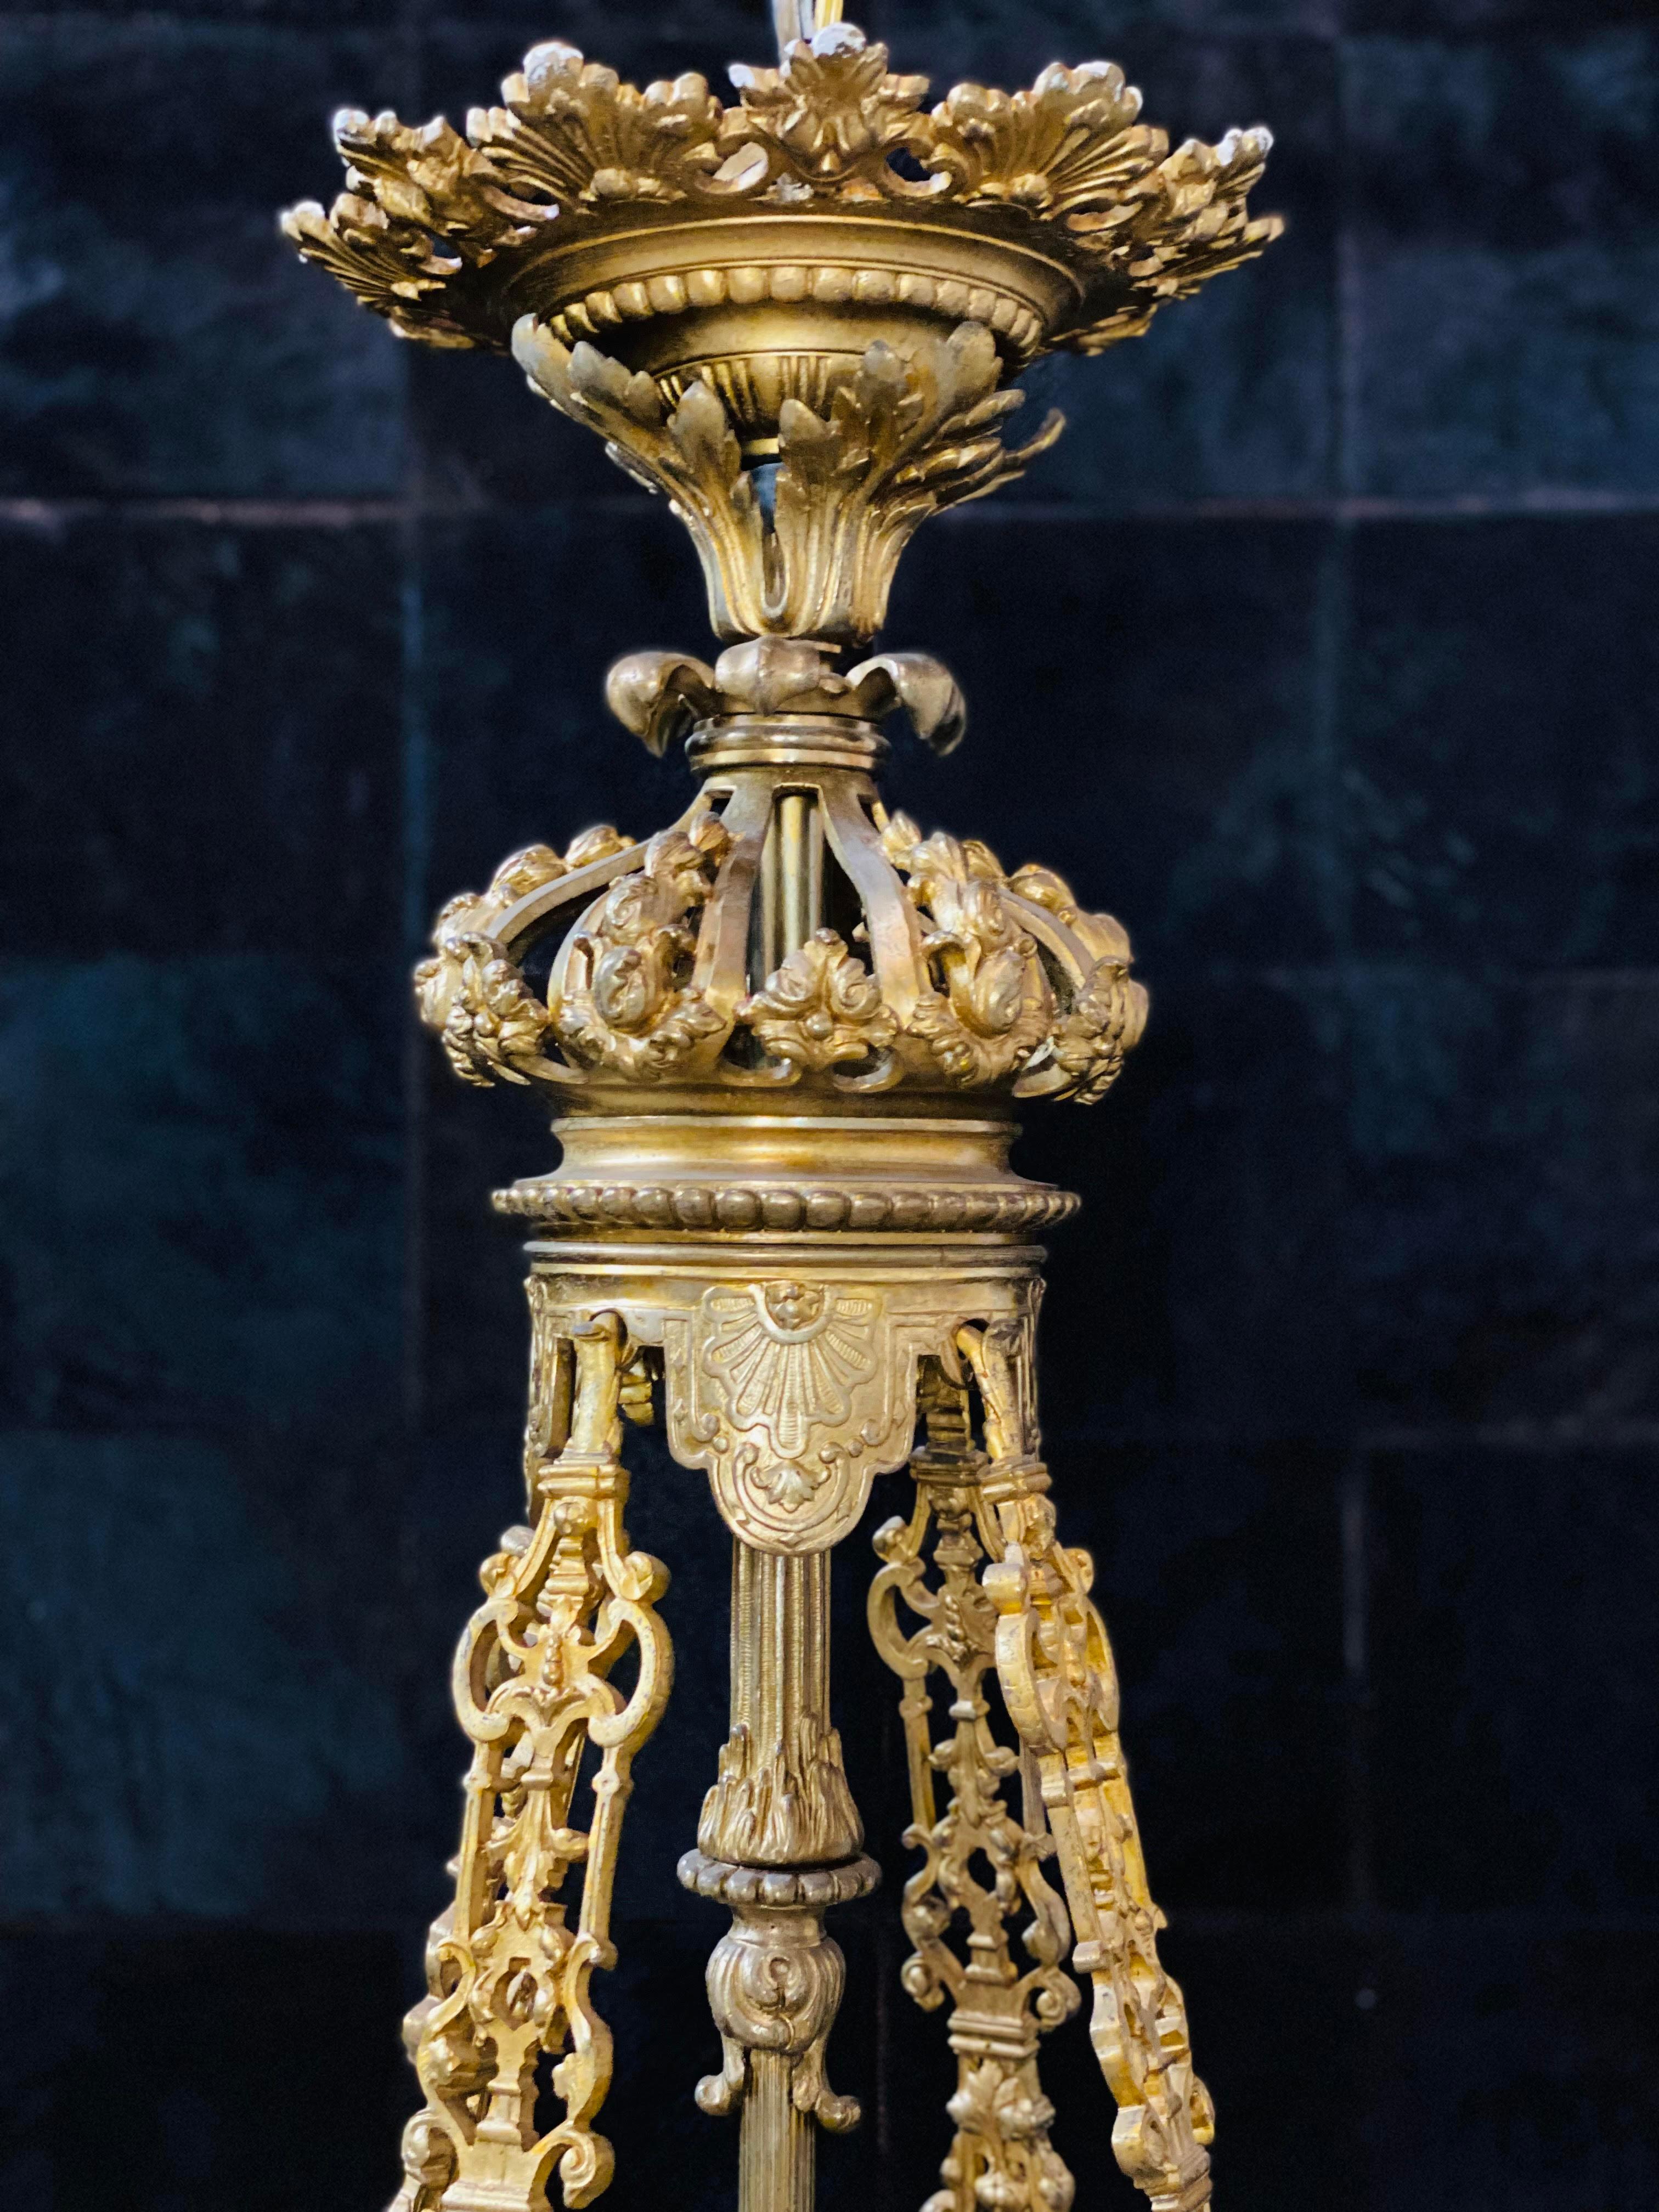 The fixture has eight arms, and each light is newly wired and dressed with alabaster bowls. This beautiful alabaster chandelier is made in Europe. 

Number of lights: 12.